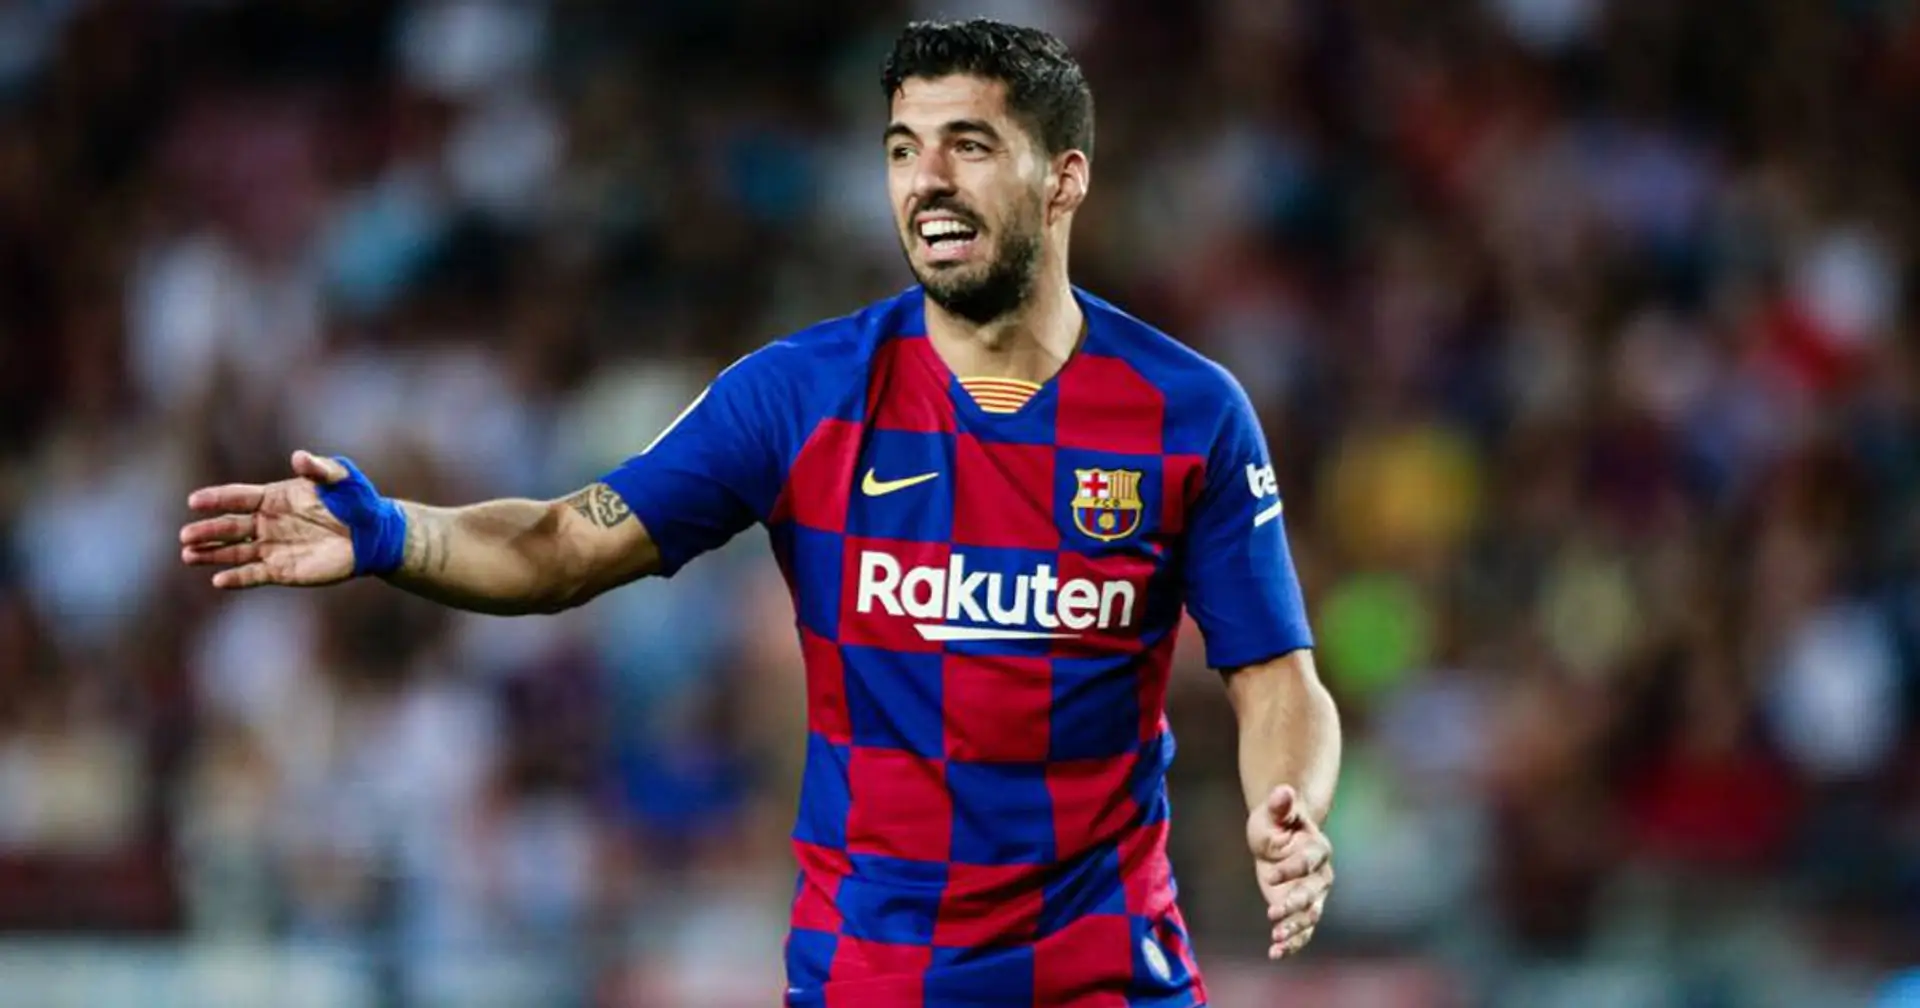 Luis Suarez reportedly nears return, set for medical clearance next week